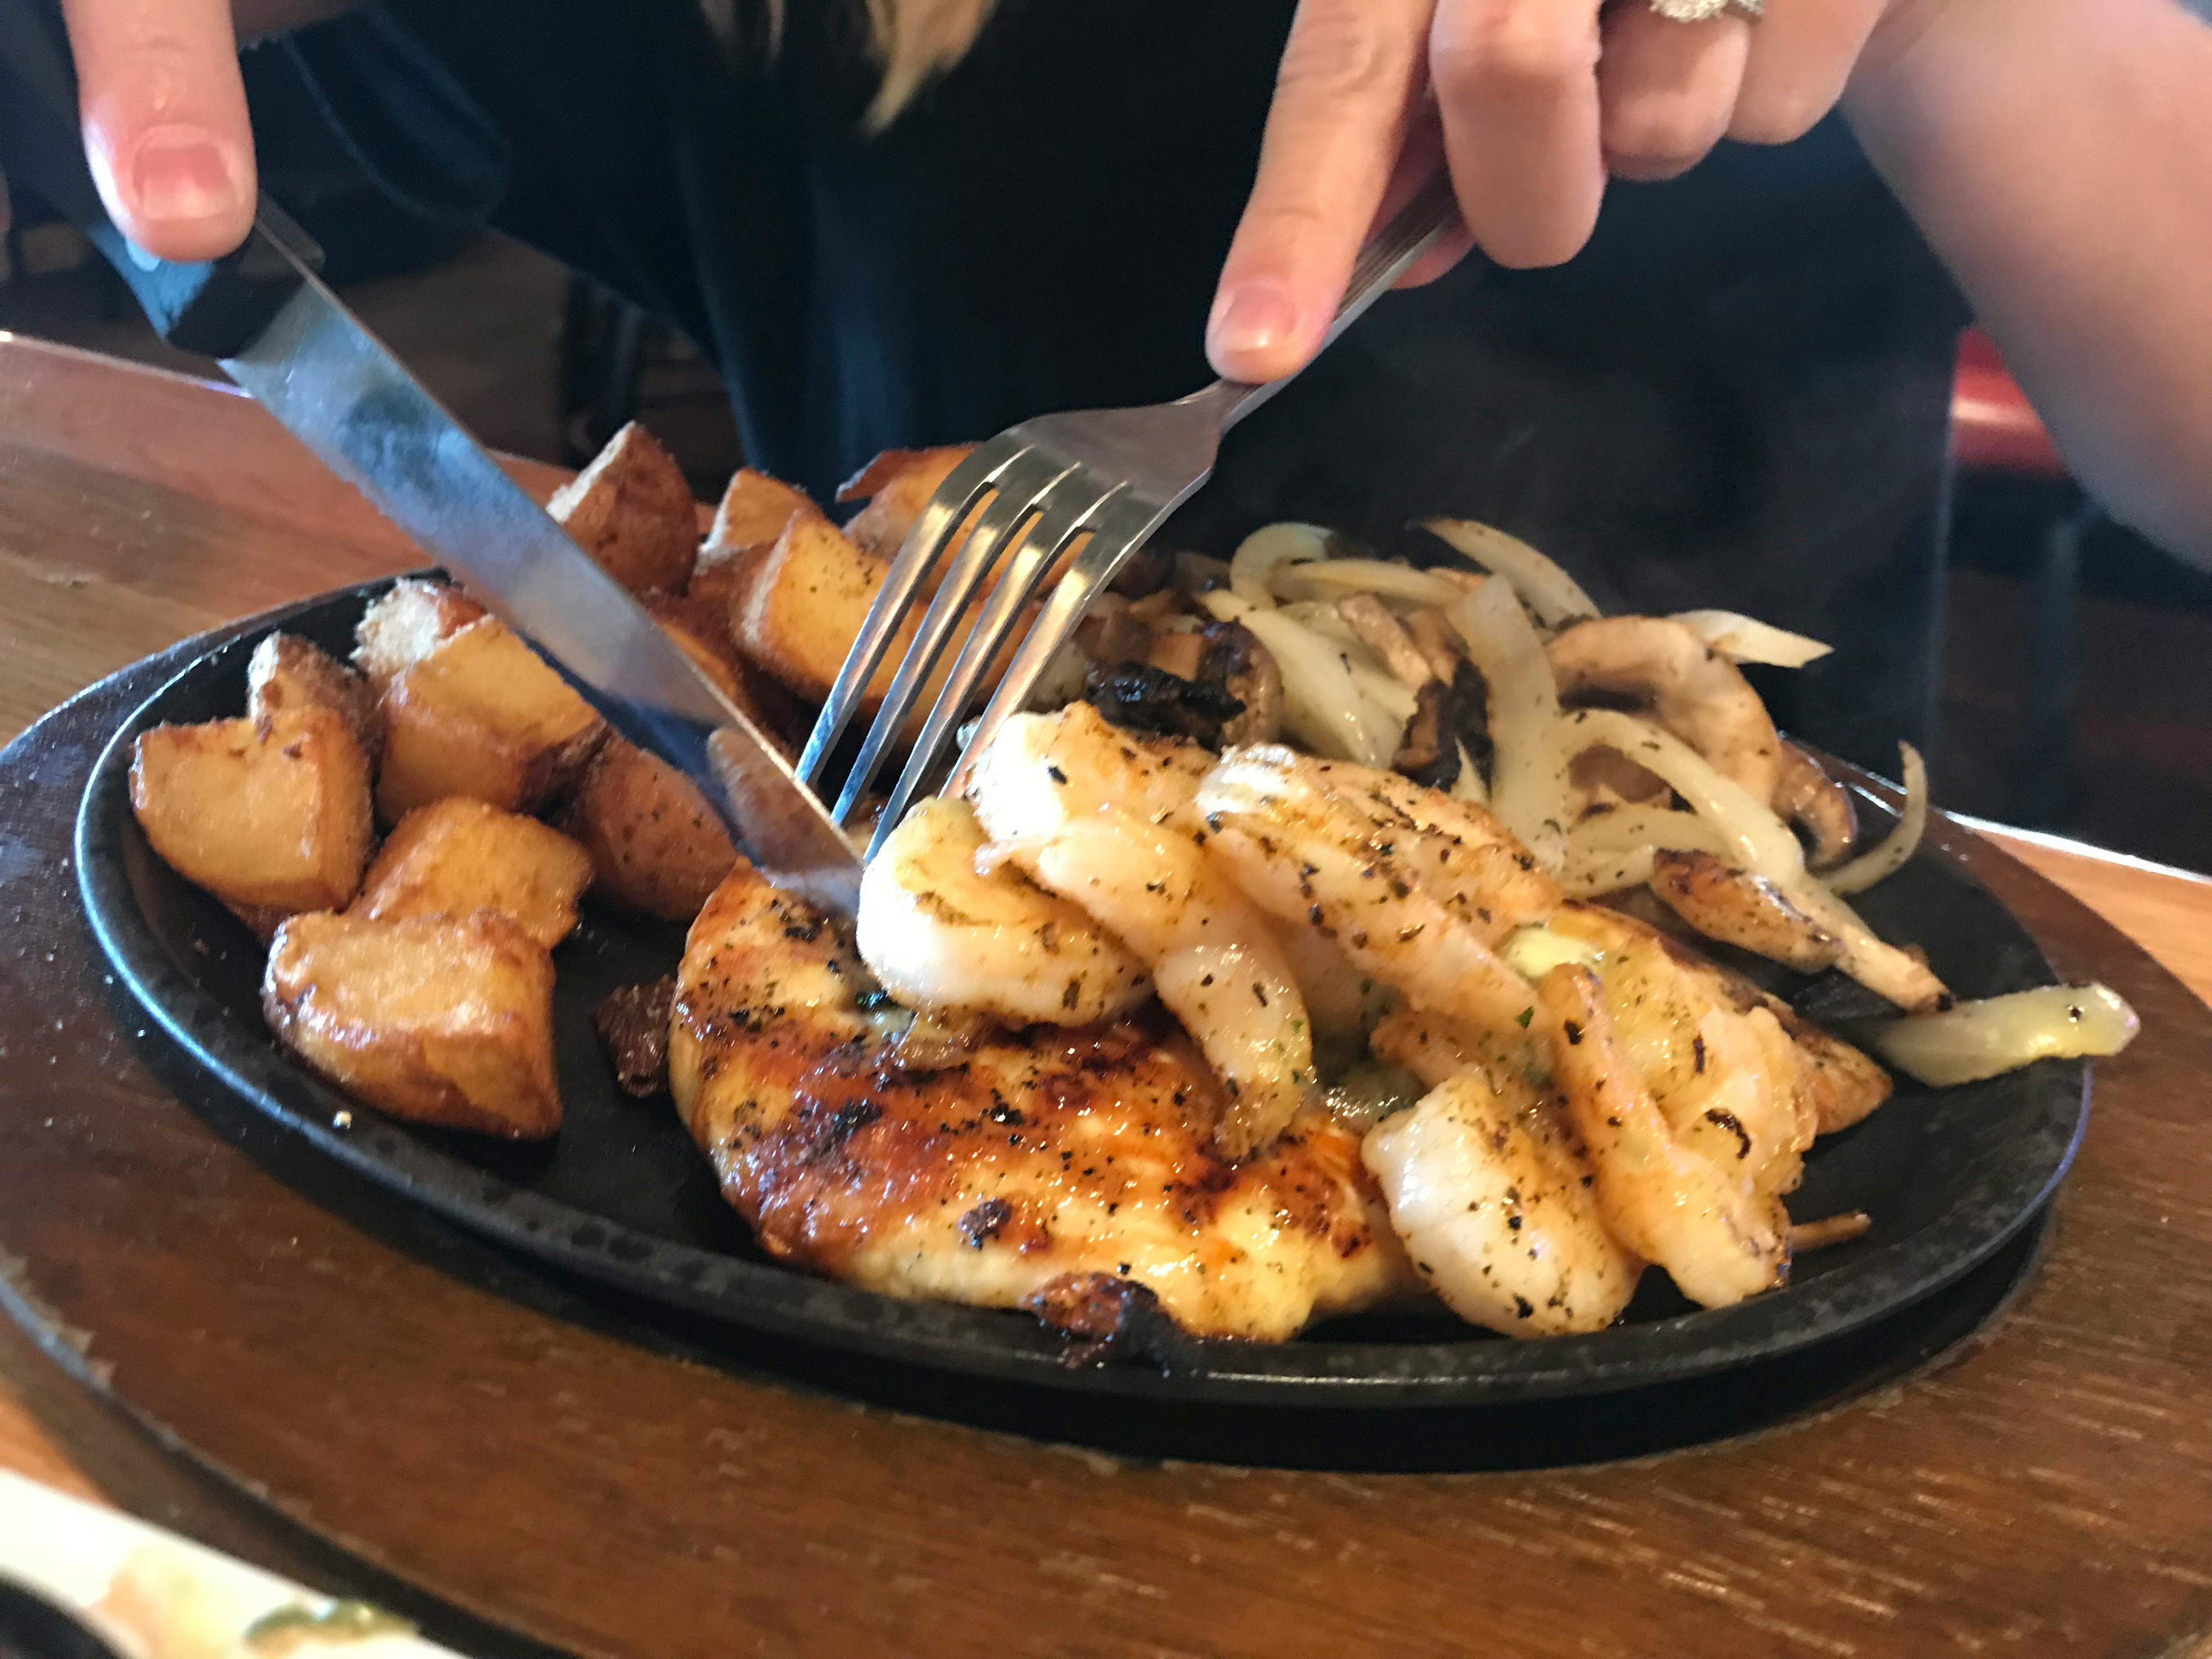 A person's hands using a fork and knife to cut into some chicken on a skillet plate of chicken, shrimp, potatoes, and onions, on a table at Applebee's.